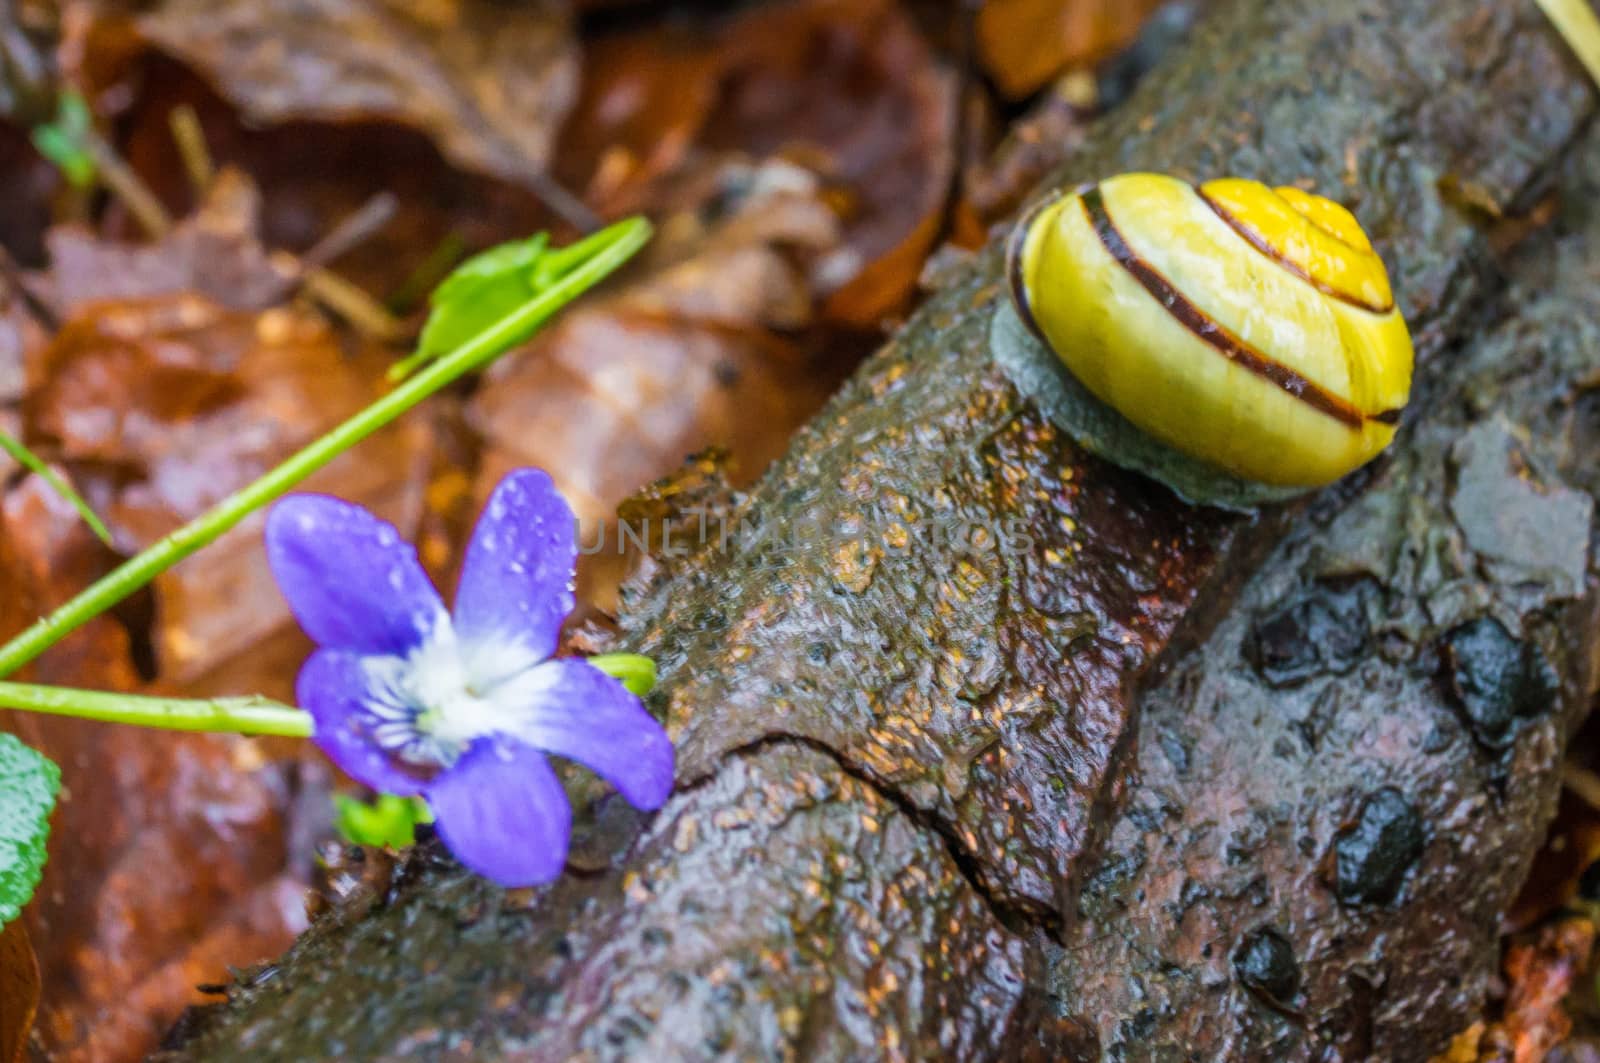 Yellow snail and purple flower in the forest after rain